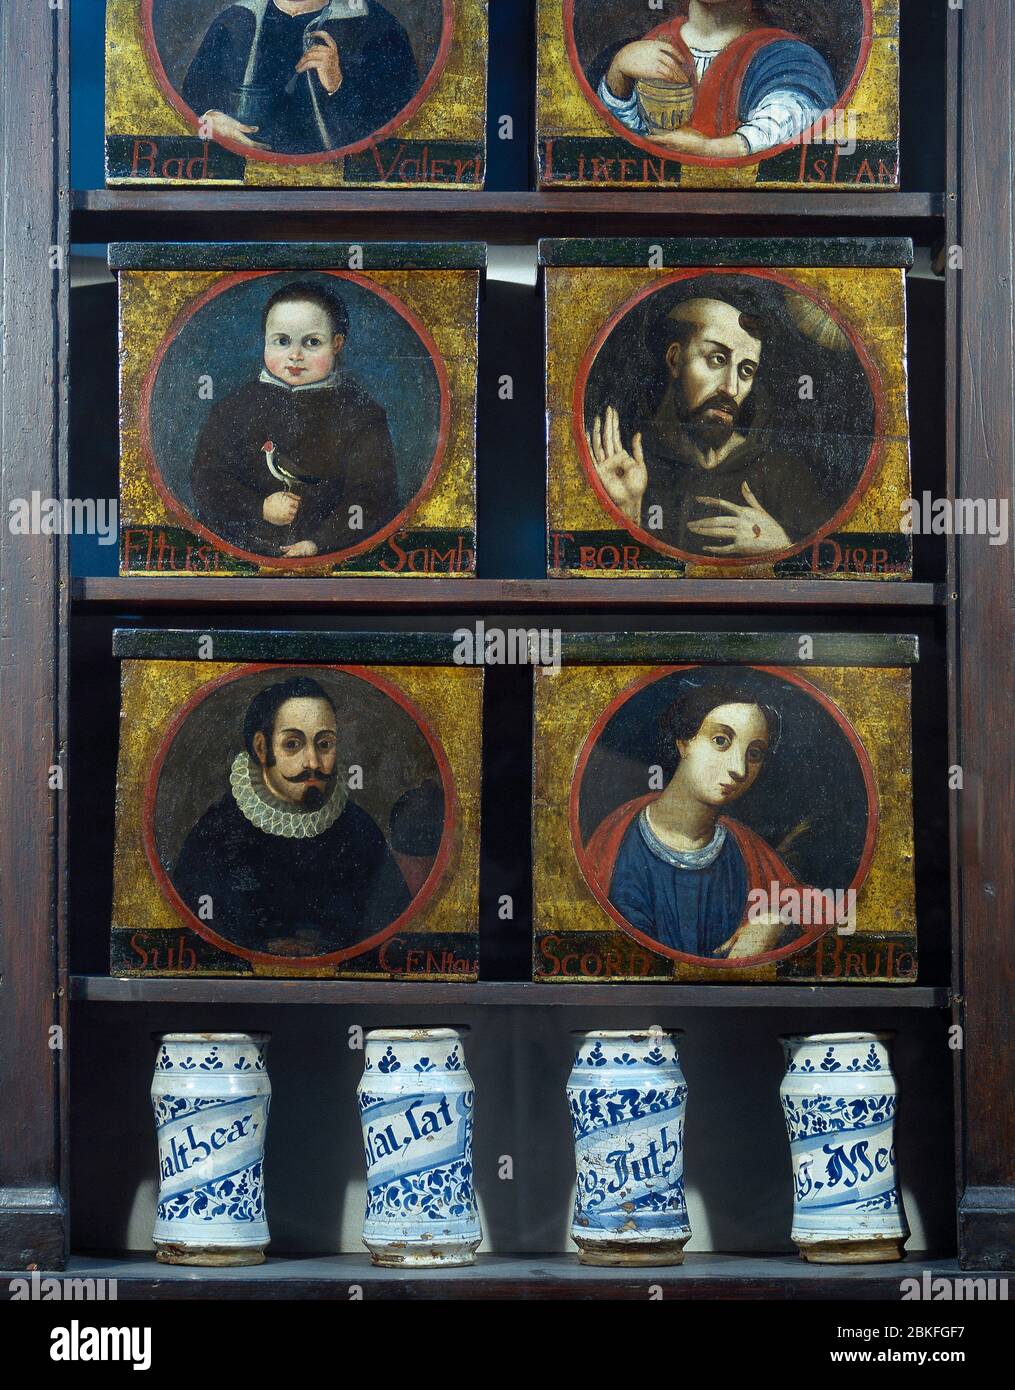 Ancient pharmacy. Wooden boxes decorated with paintings. They wew used to classify herbs and medicines. Museum of Esteve Pharmacy. Llivia, Girona province, Cerdanya region, Catalonia, Spain. Stock Photo